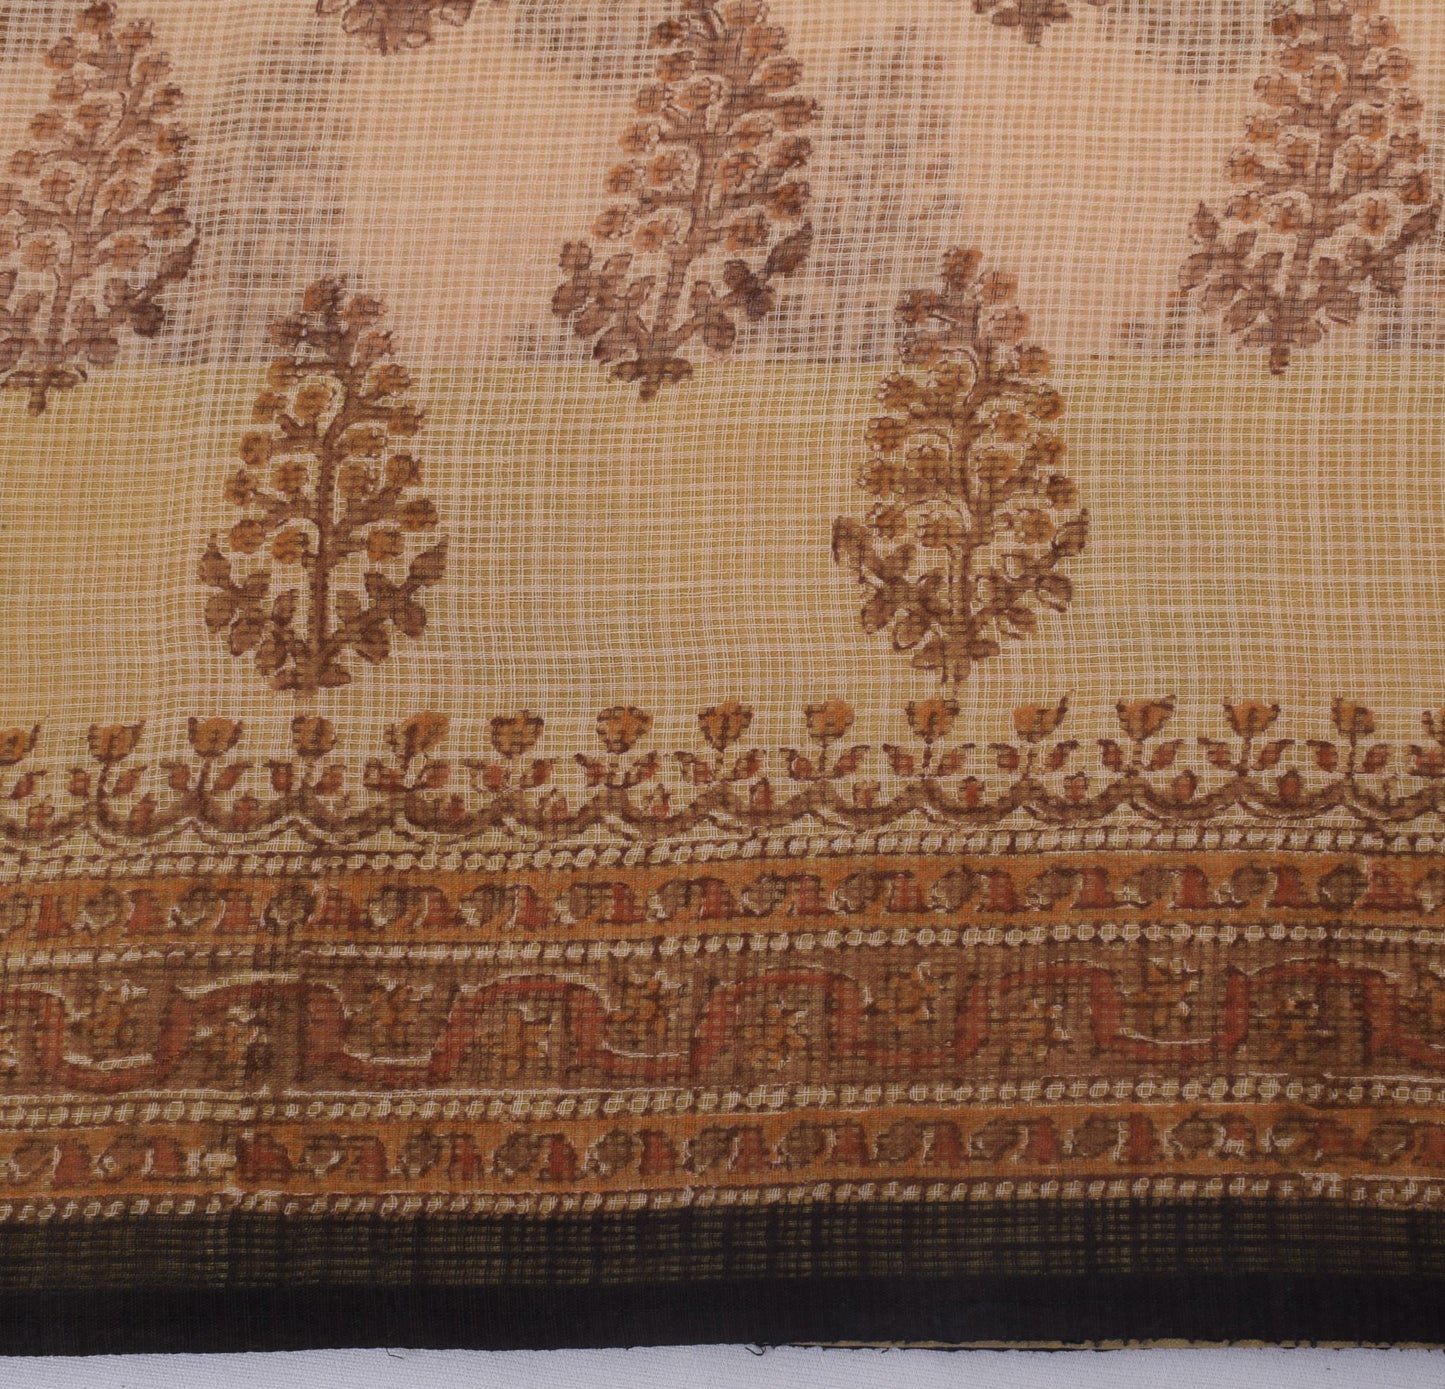 Sushila Vintage Brown Saree 100% Pure Cotton Printed Floral Craft Sheer Fabric